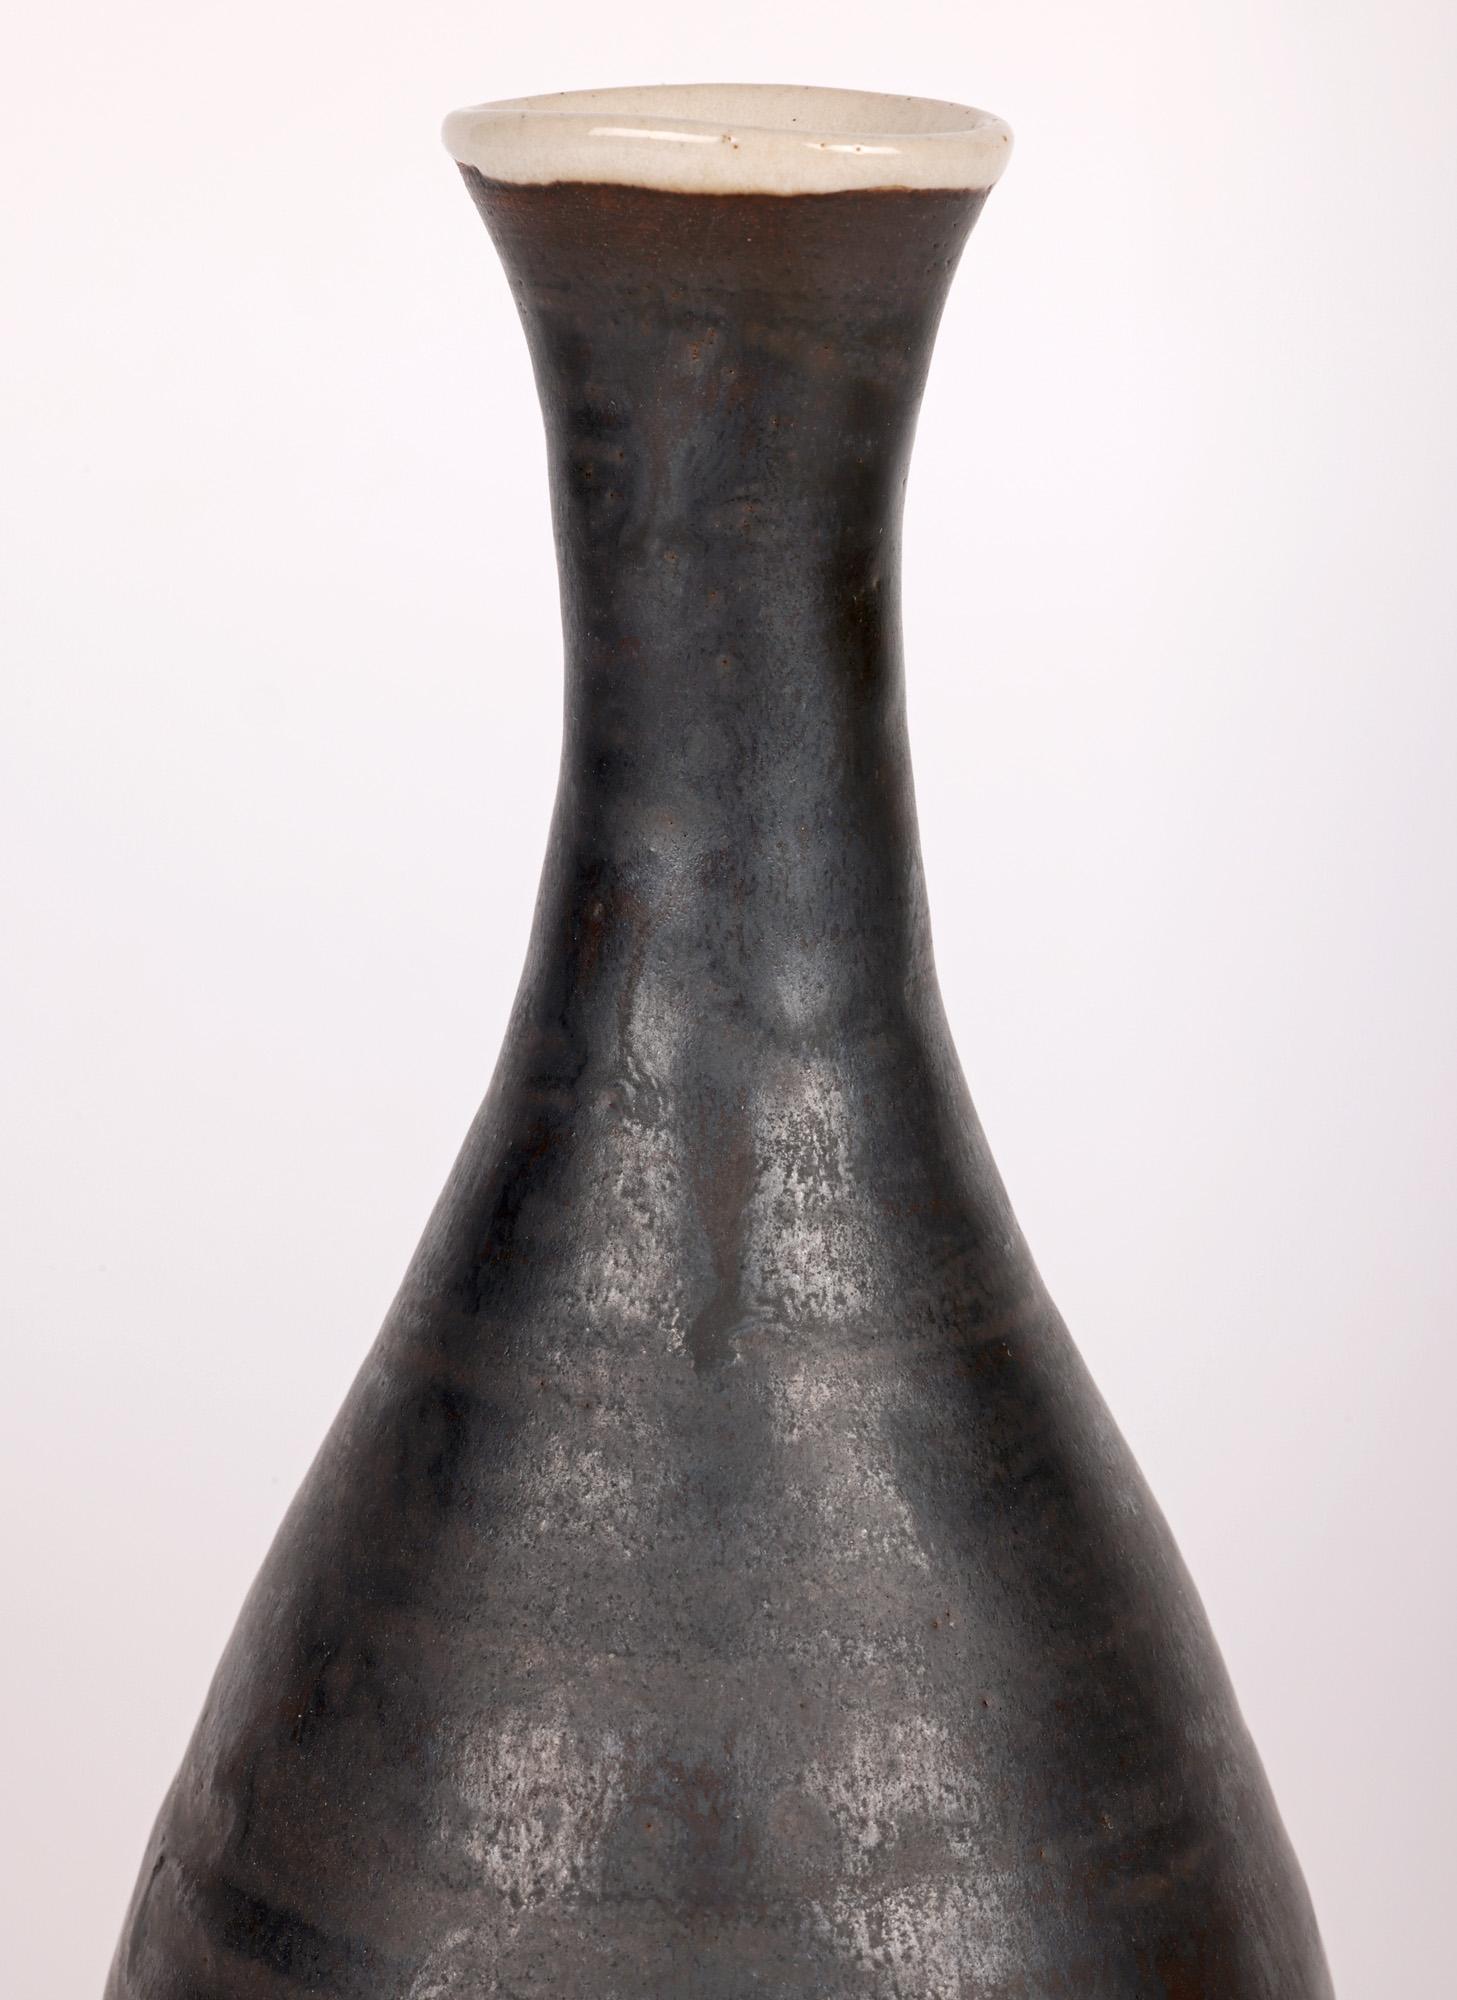 A scarce mid-century Studio Pottery Festival of Britain vase by renowned modernist potter Dame Lucie Rie (Austrian, 1902 – 1995) dated 1951. The bottle shaped vase stands on a round unglazed foot with slightly recessed base the body narrowing to a